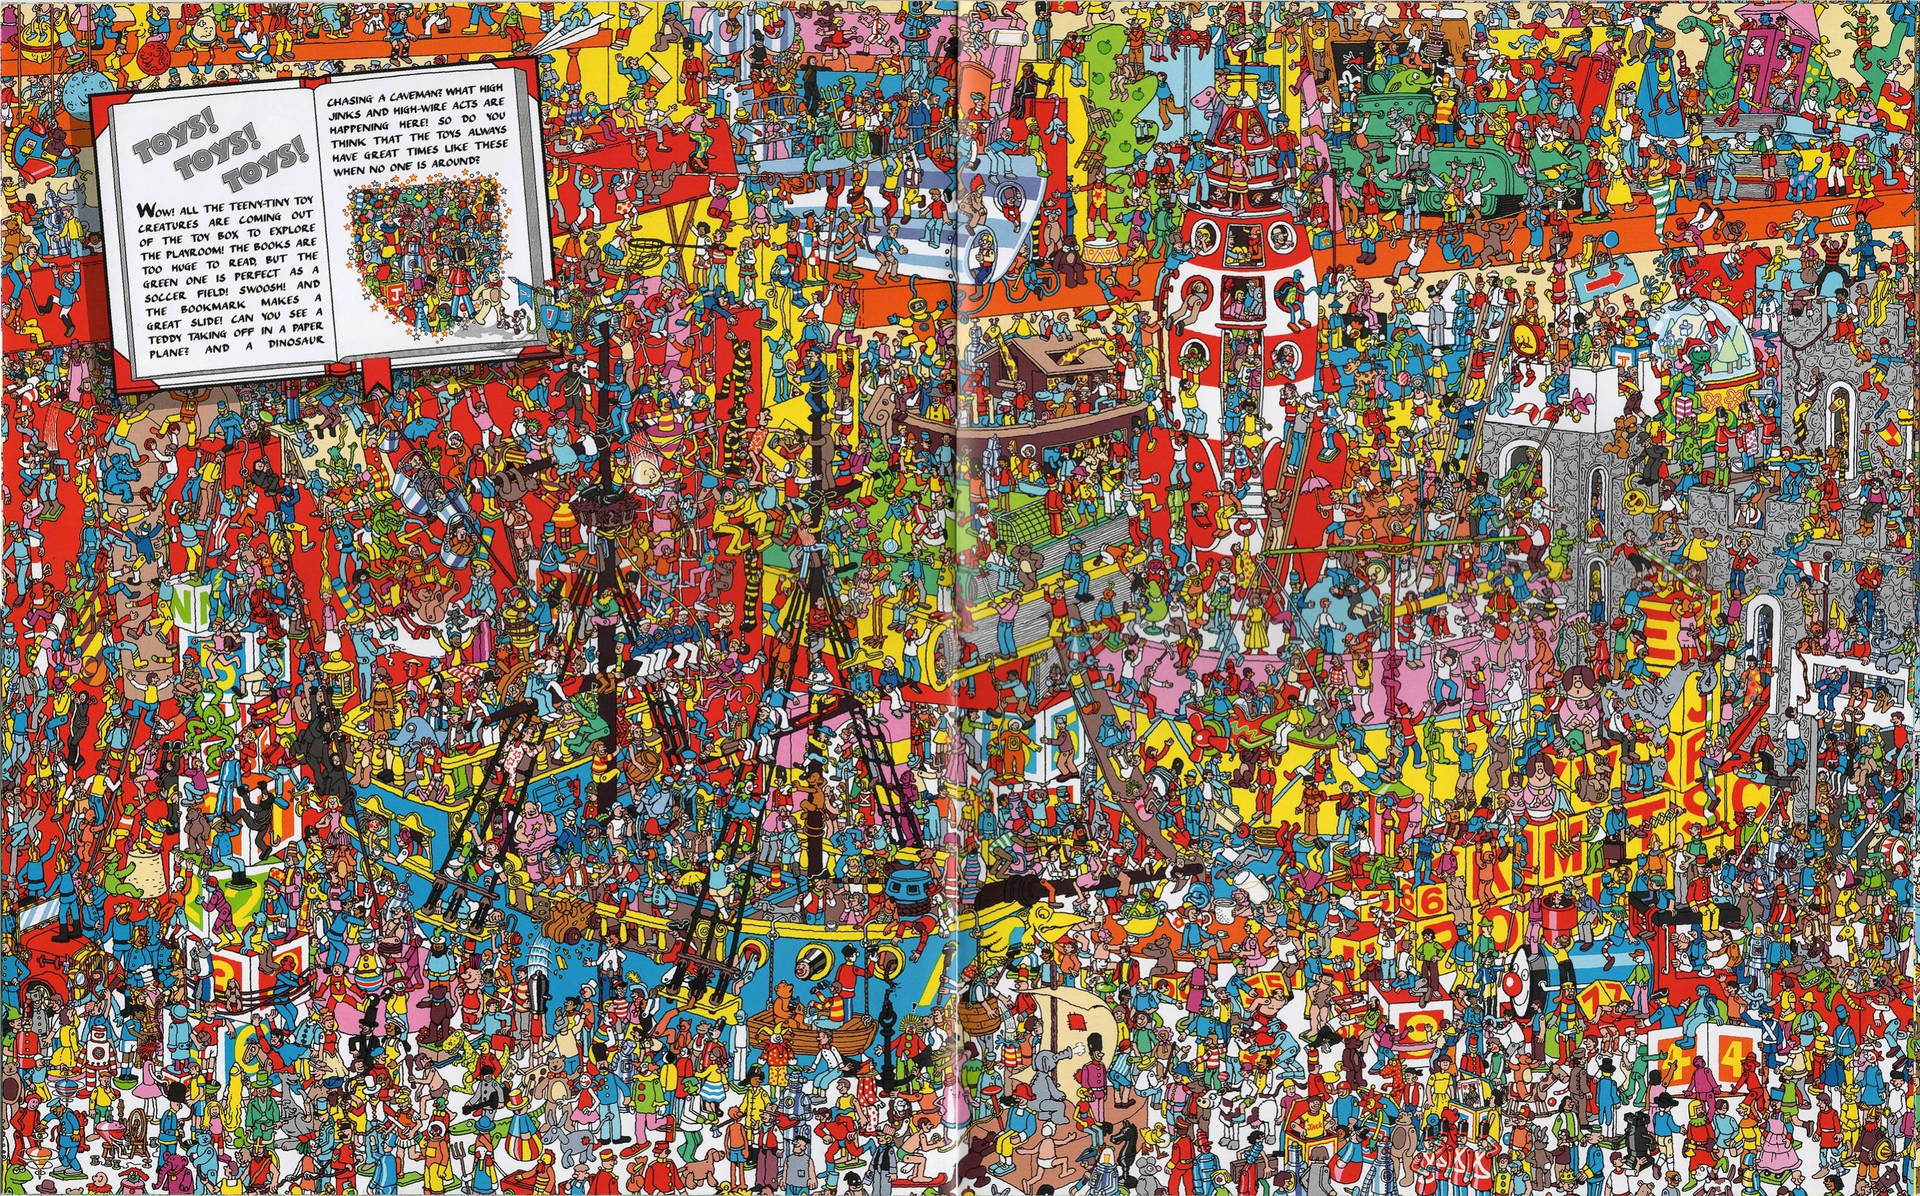 A Vibrant And Intriguing Scene From Where's Waldo With Miniature Toy Creatures, Triggering A Captivating Search Adventure. Background